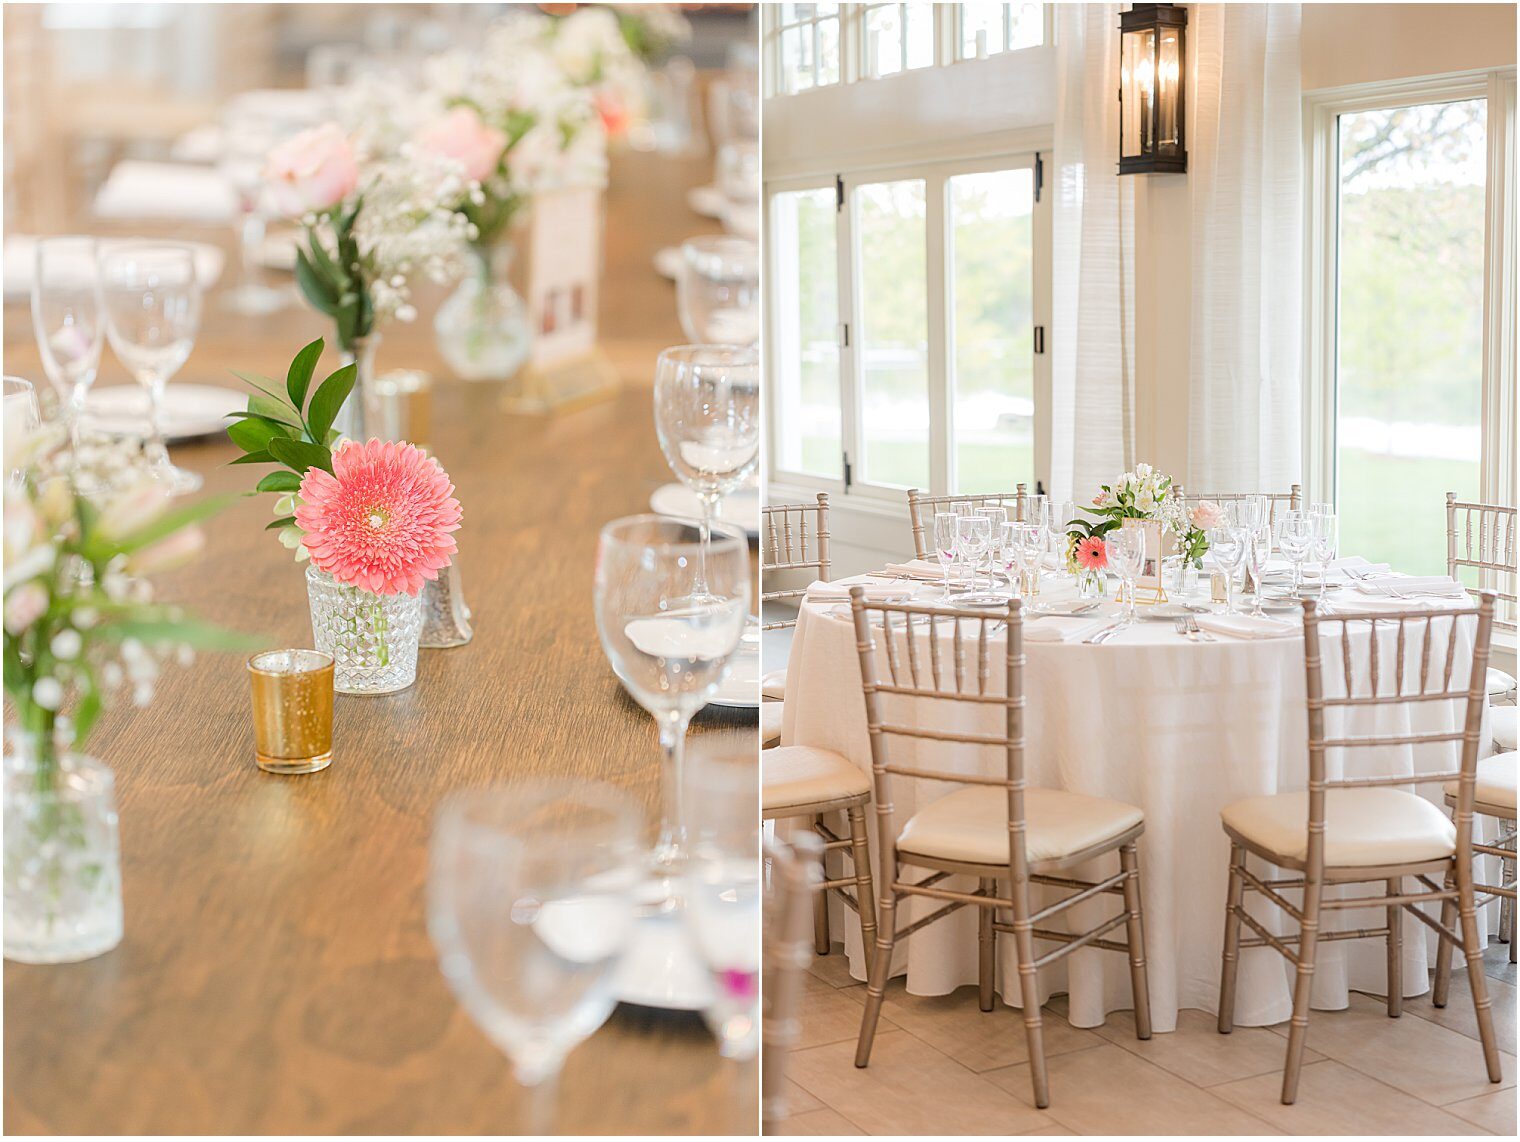 Reception details for a wedding at Indian Trail Club